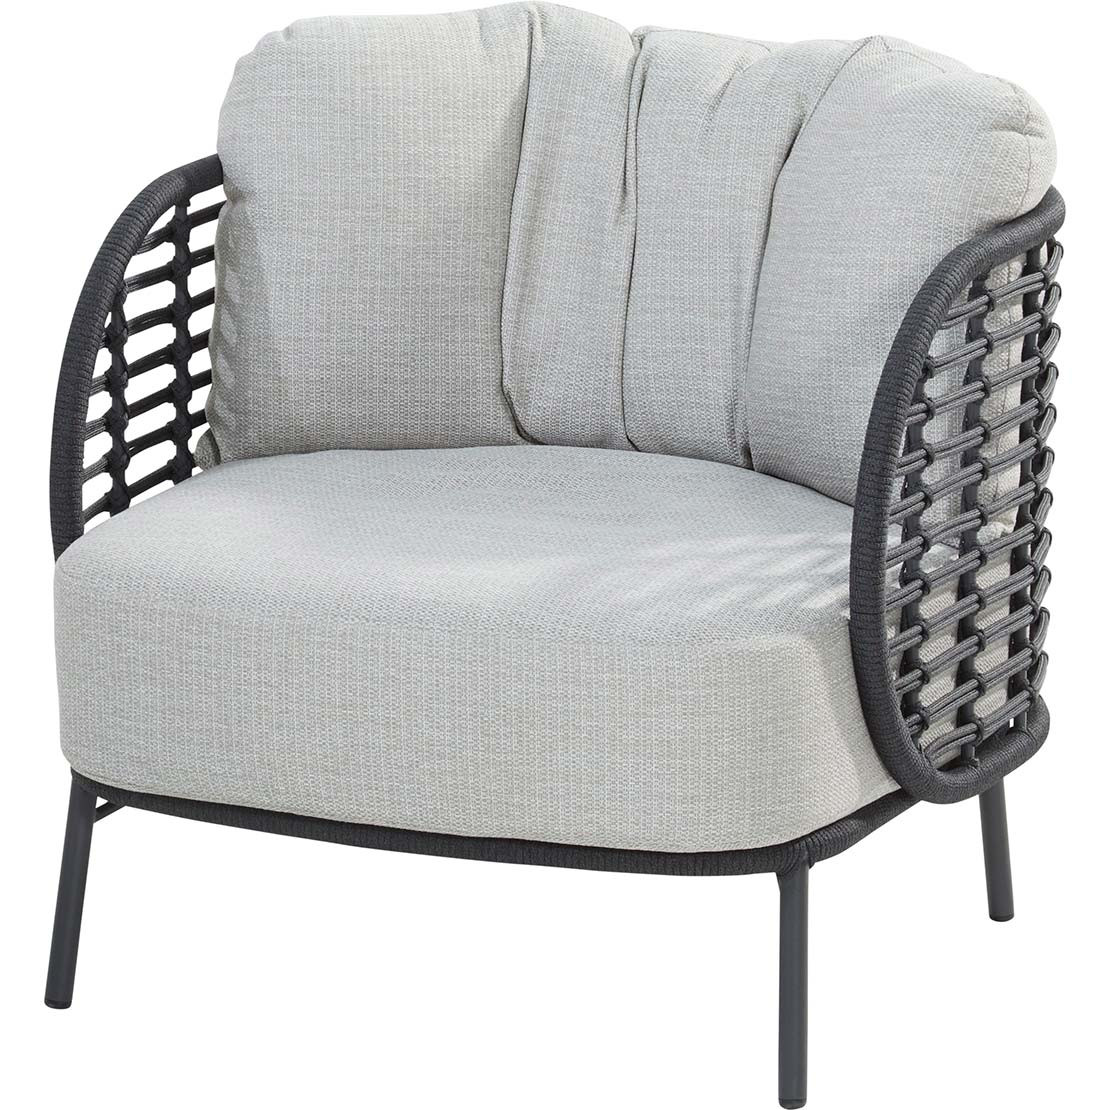 Fabrice living chair Anthracite with 2 cushions